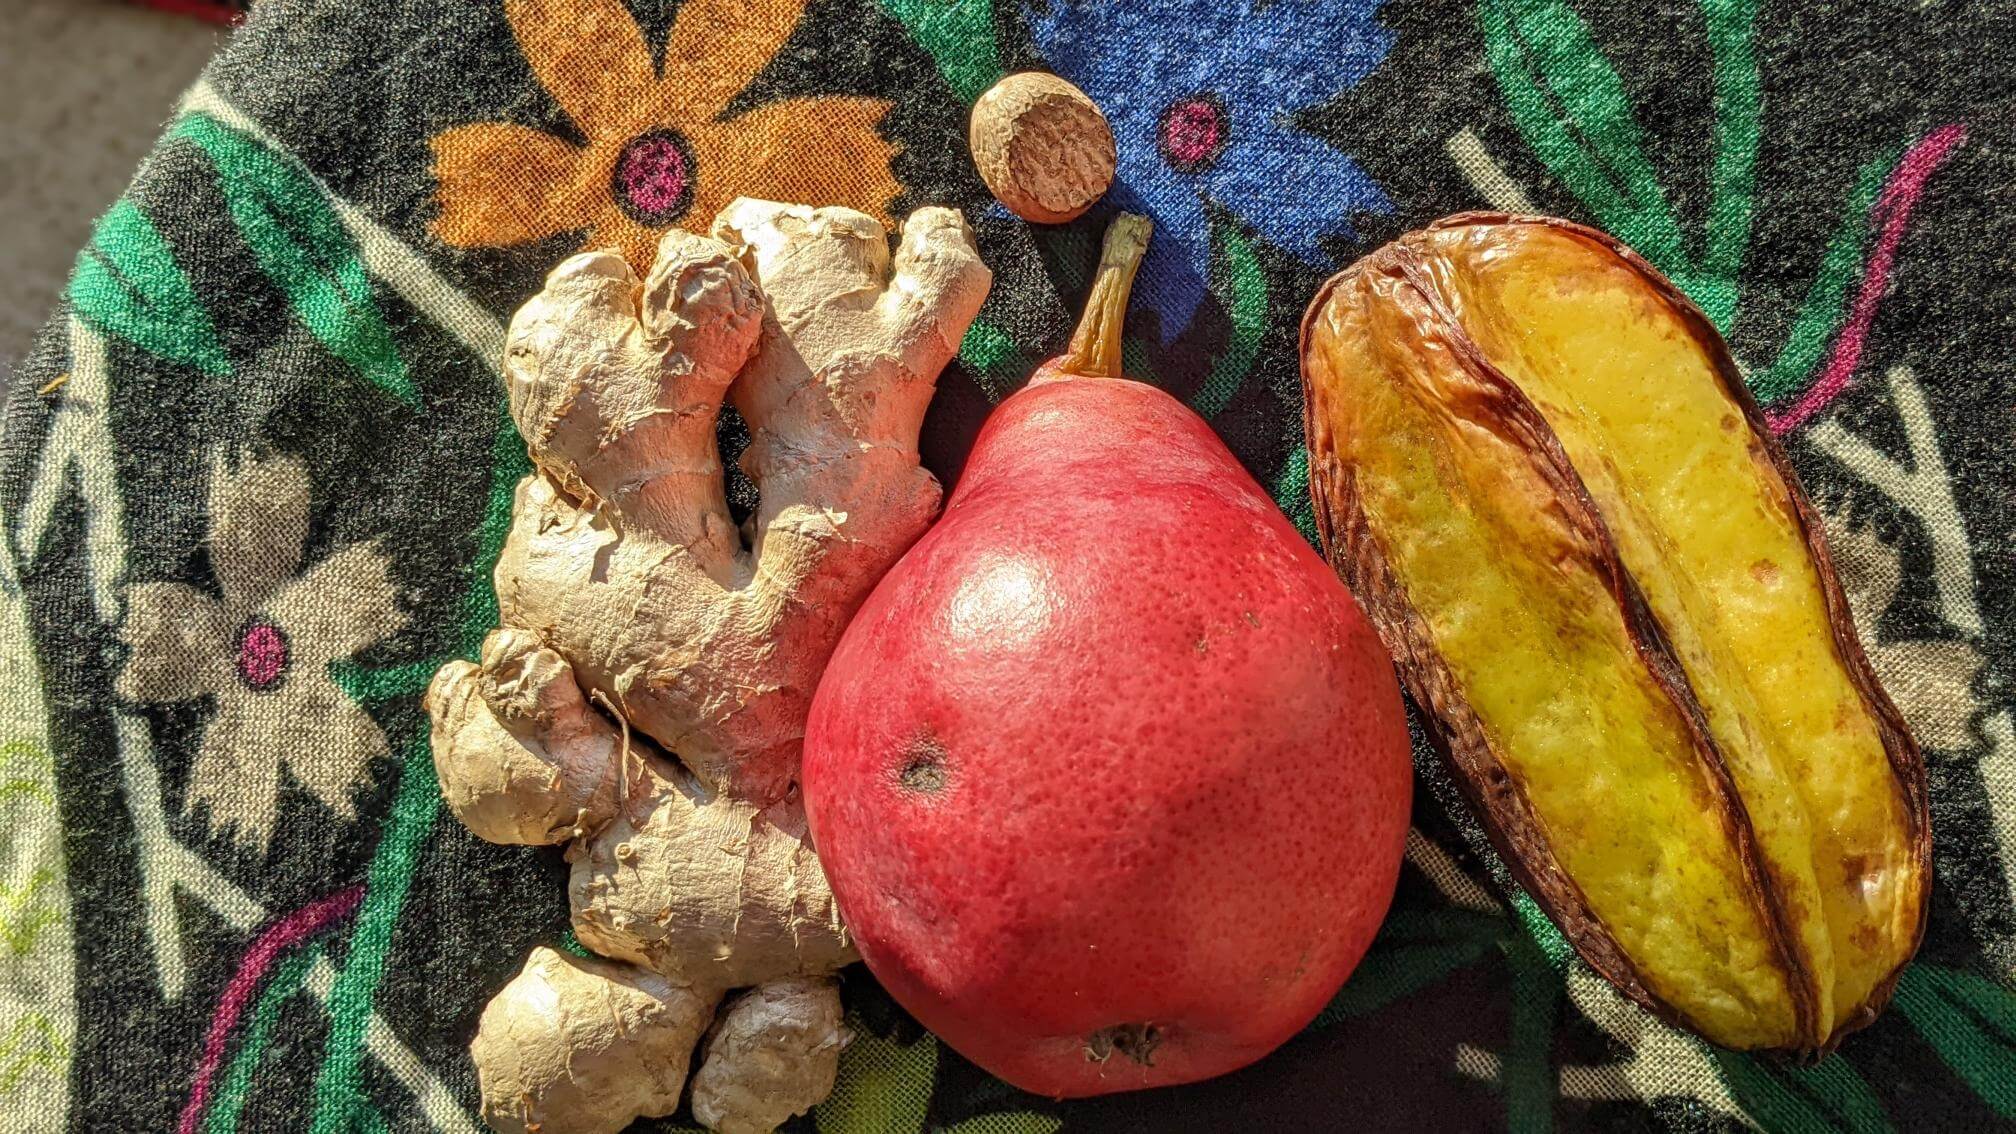 A fresh pear, ginger, and starfruit appear on a multi-color scarf in natural light.